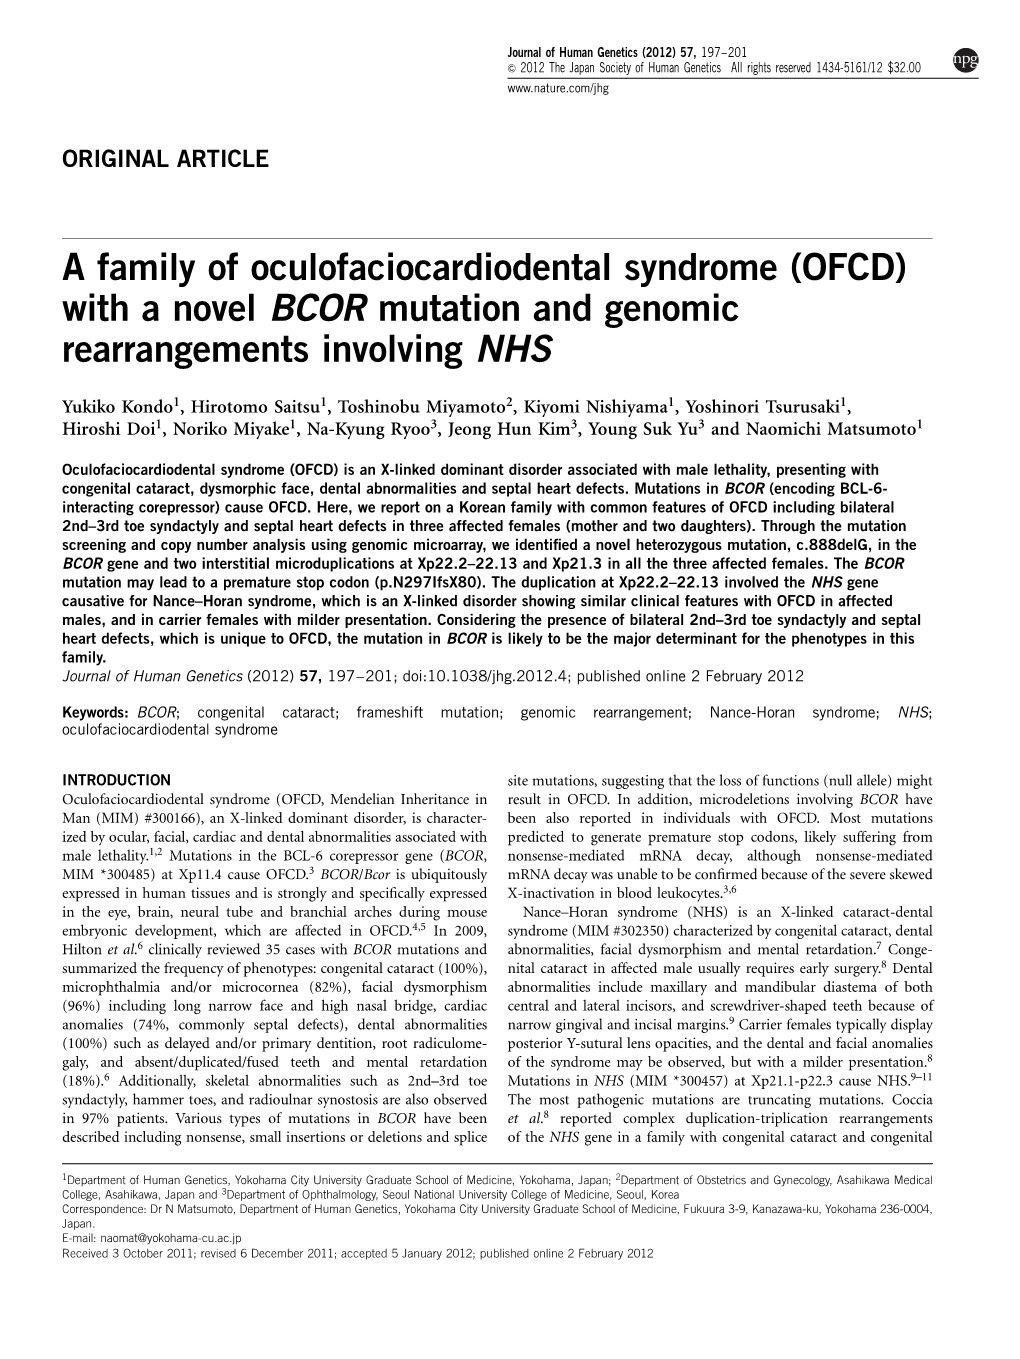 With a Novel BCOR Mutation and Genomic Rearrangements Involving NHS